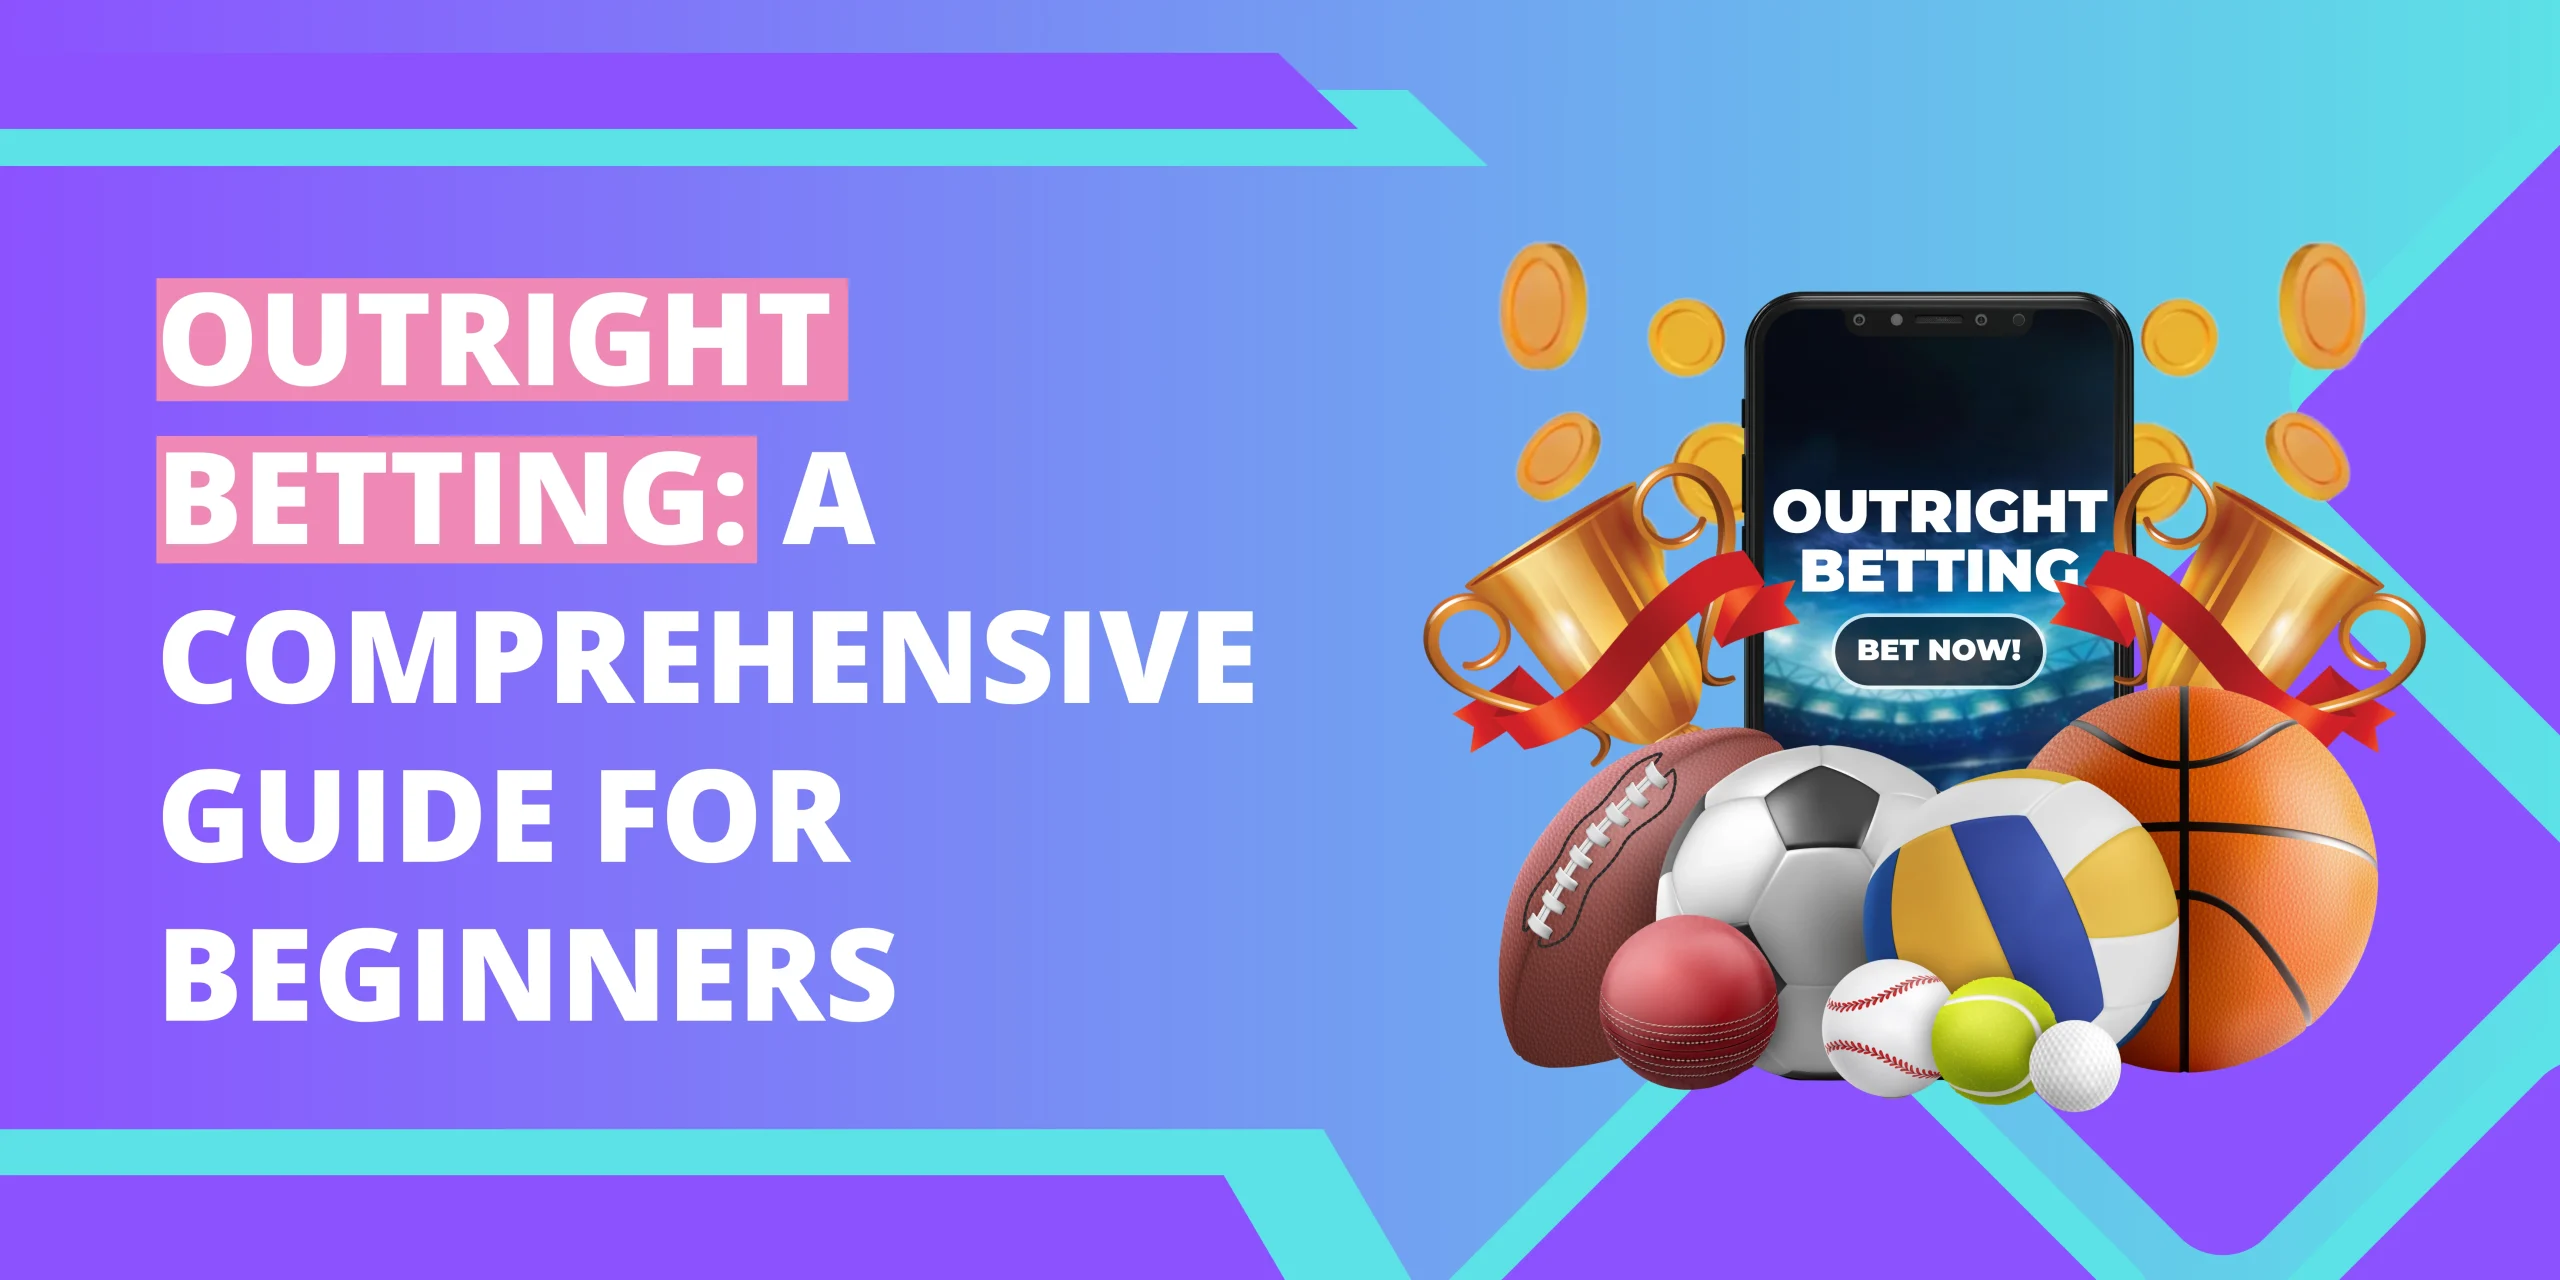 Outright Betting: A Comprehensive Guide for Beginners